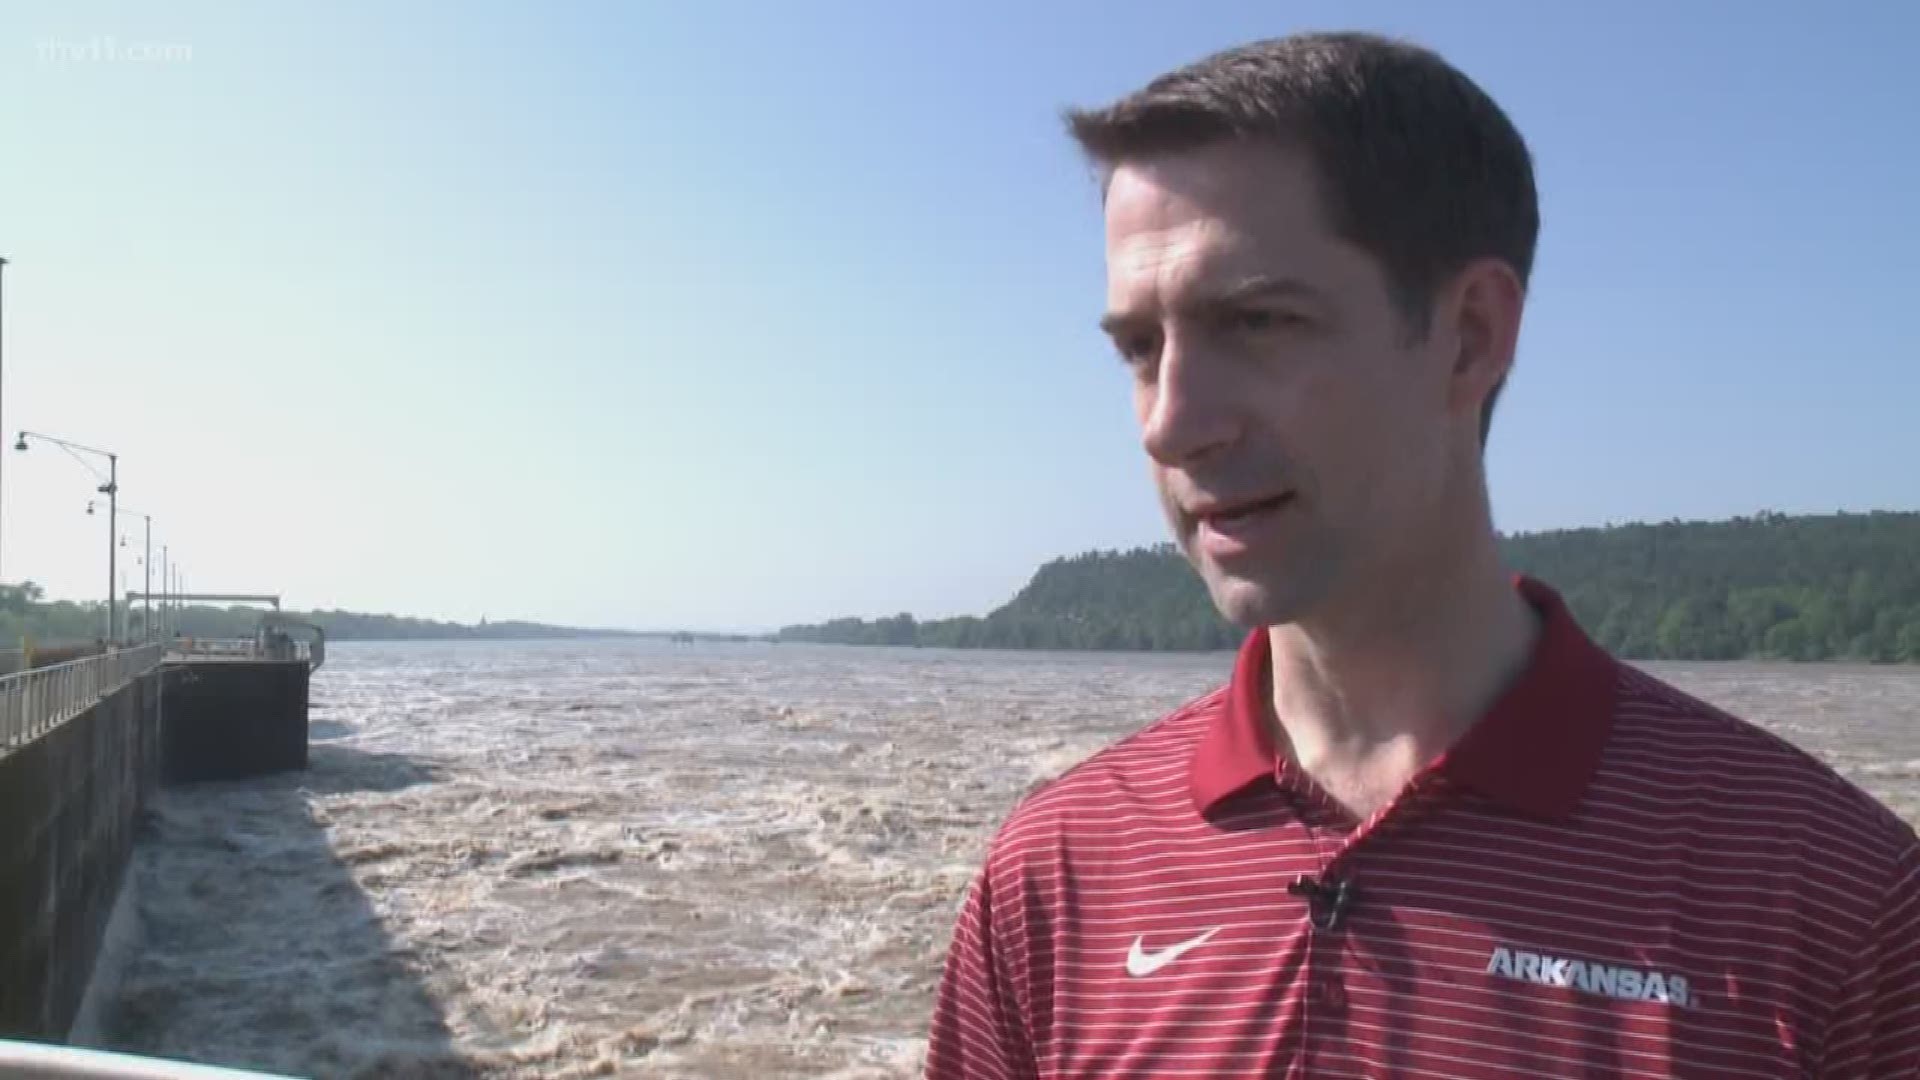 Senator Tom Cotton toured some of the flooded areas in and around his hometown of Dardanelle.